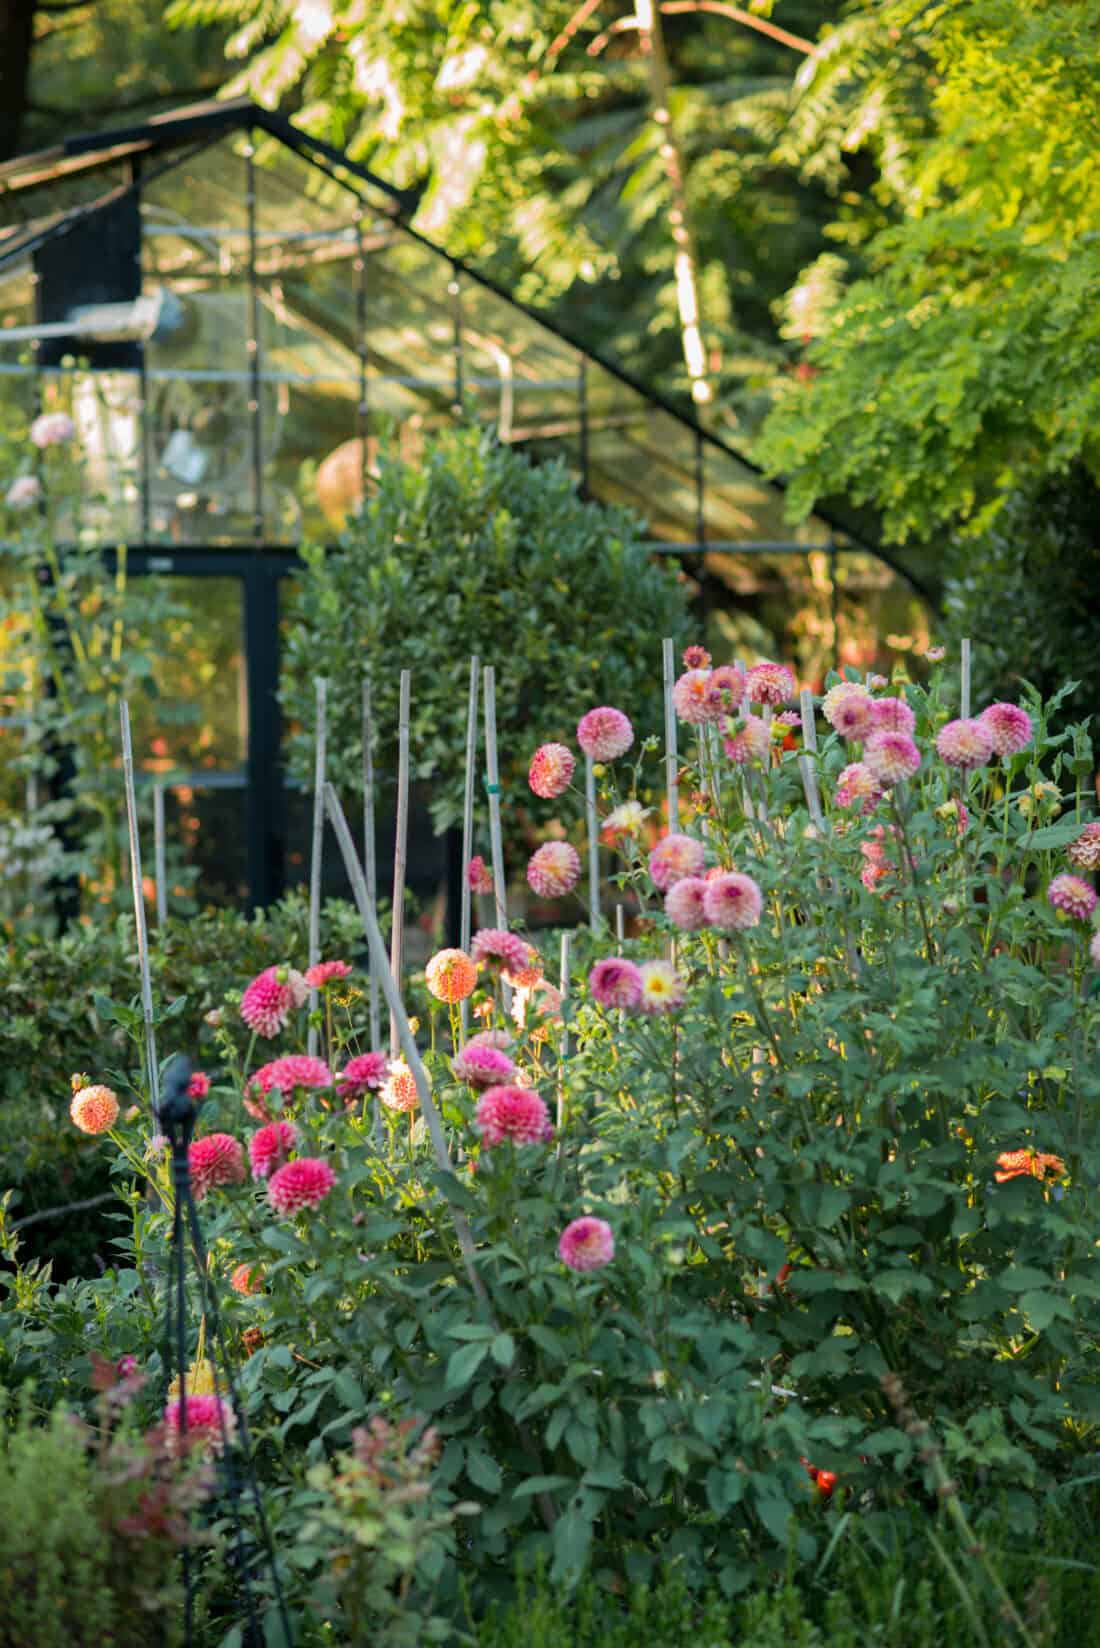 A lush garden filled with vibrant pink dahlia flowers in full bloom, with tall greenery and a glass greenhouse visible in the background.